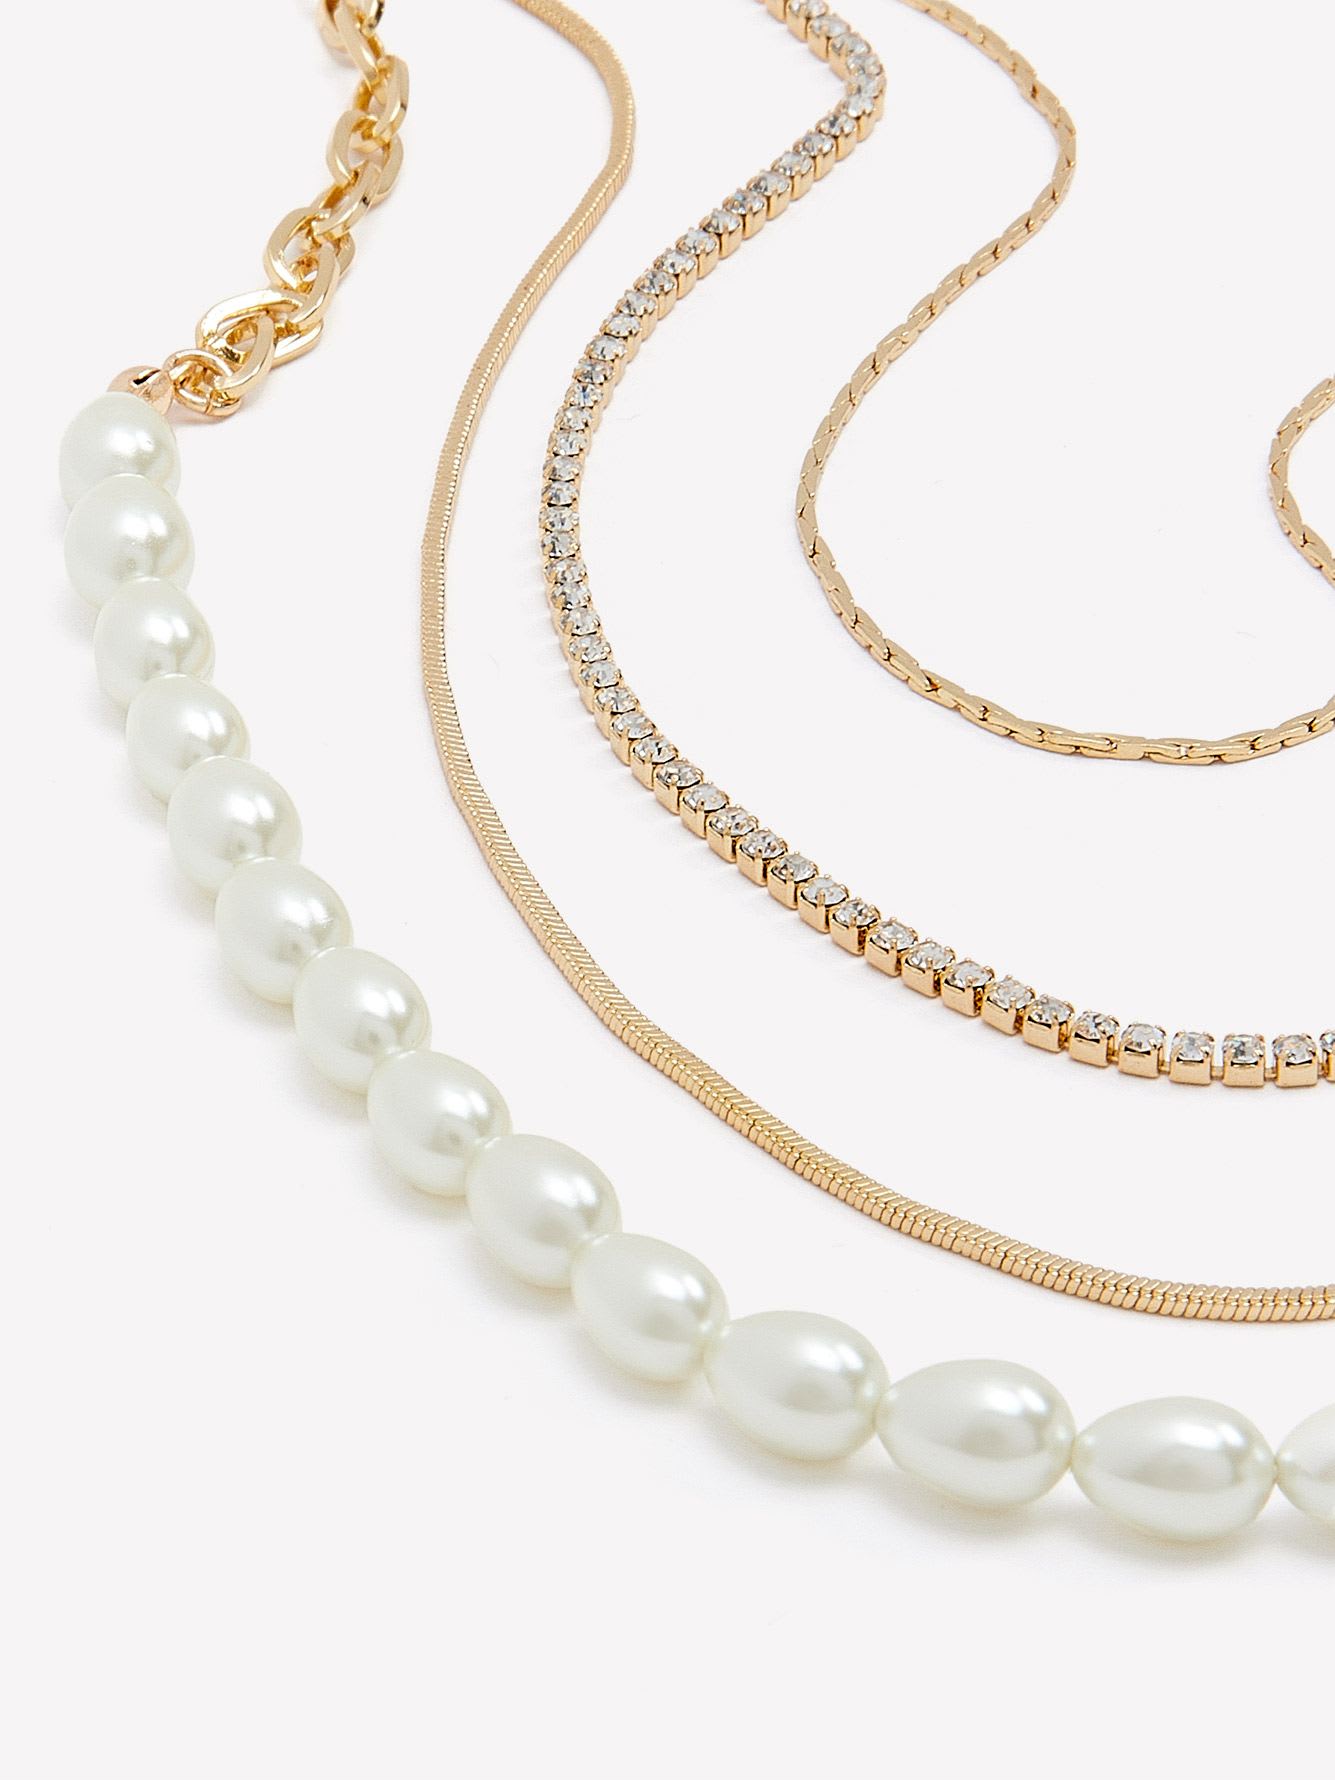 Four-Layer Dainty Necklace with Pearls